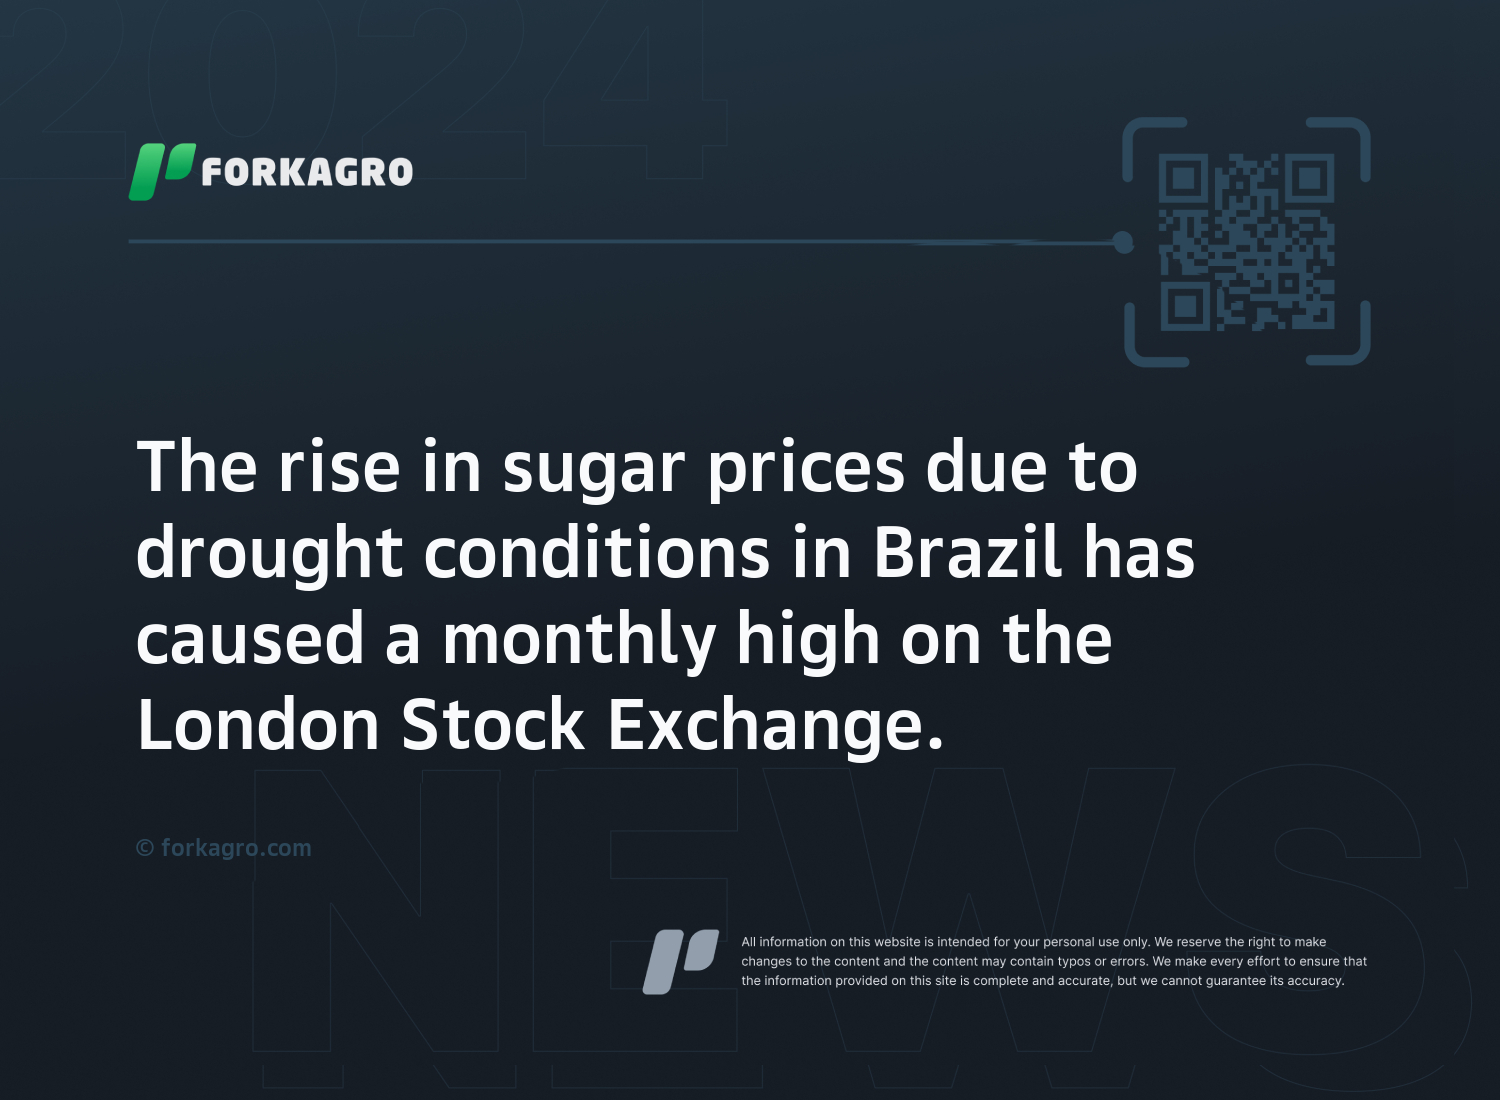 The rise in sugar prices due to drought conditions in Brazil has caused a monthly high on the London Stock Exchange.